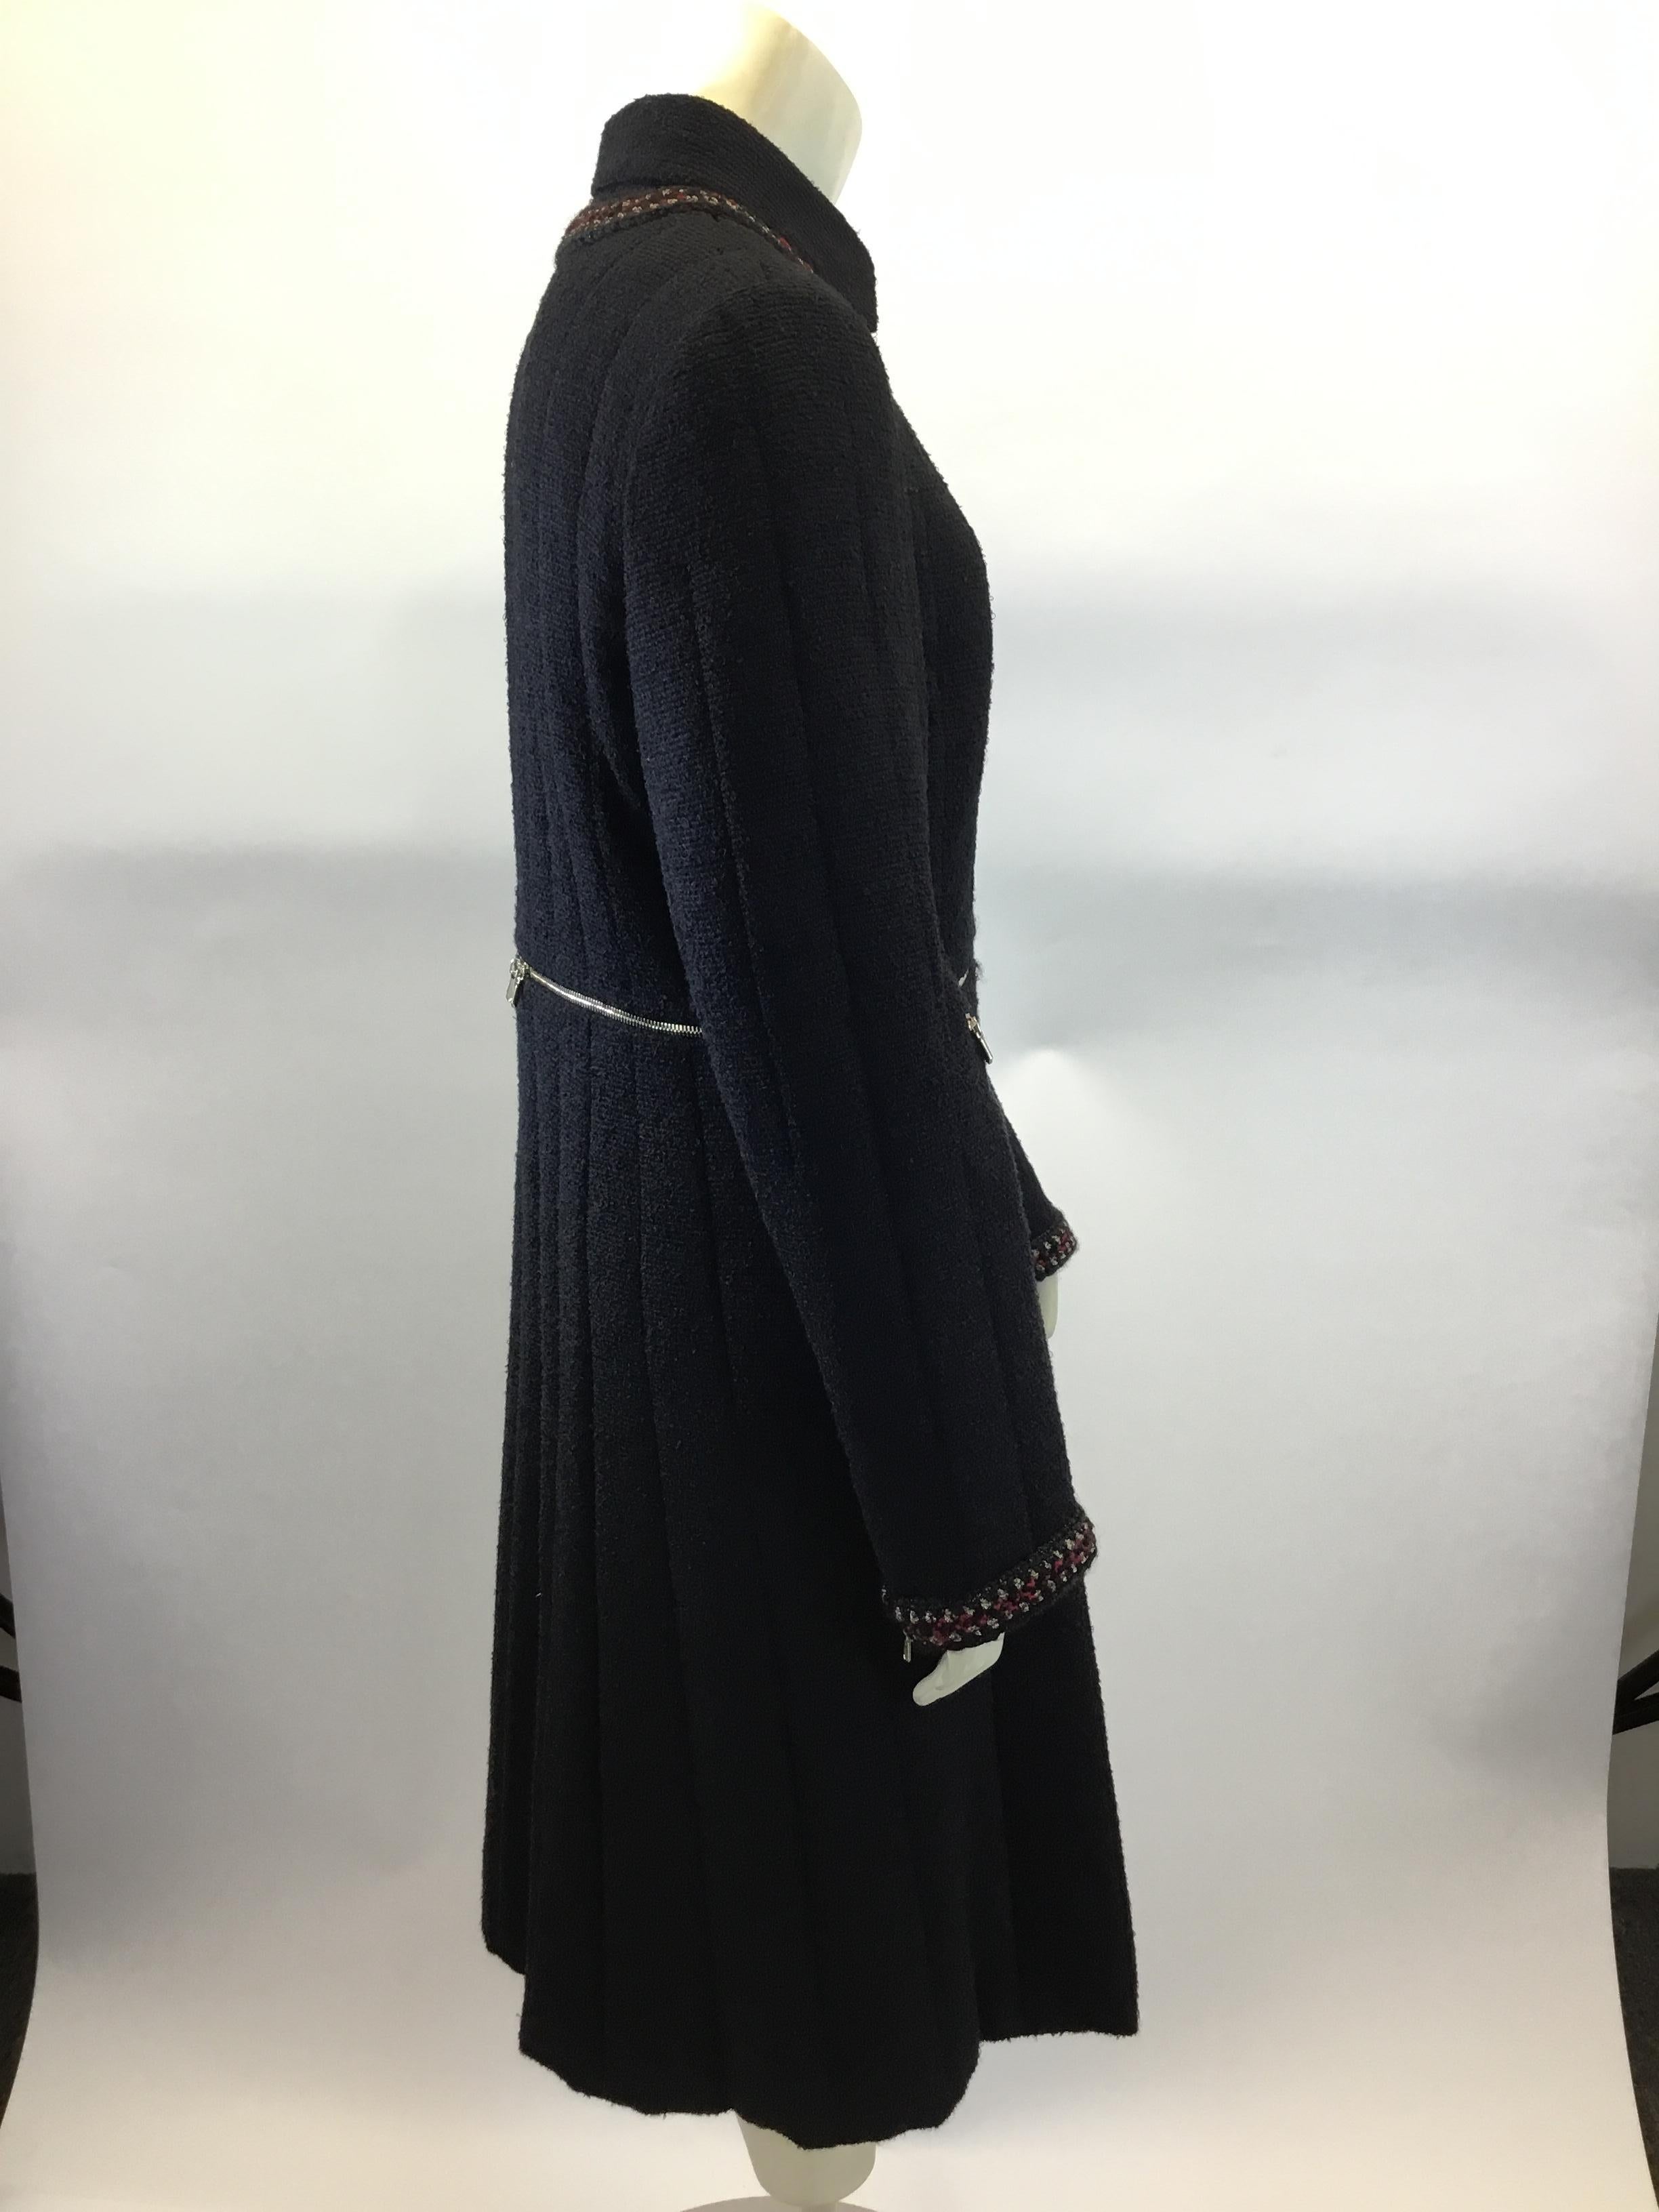 Chanel 'Shanghai' Wool Coat In Good Condition For Sale In Narberth, PA